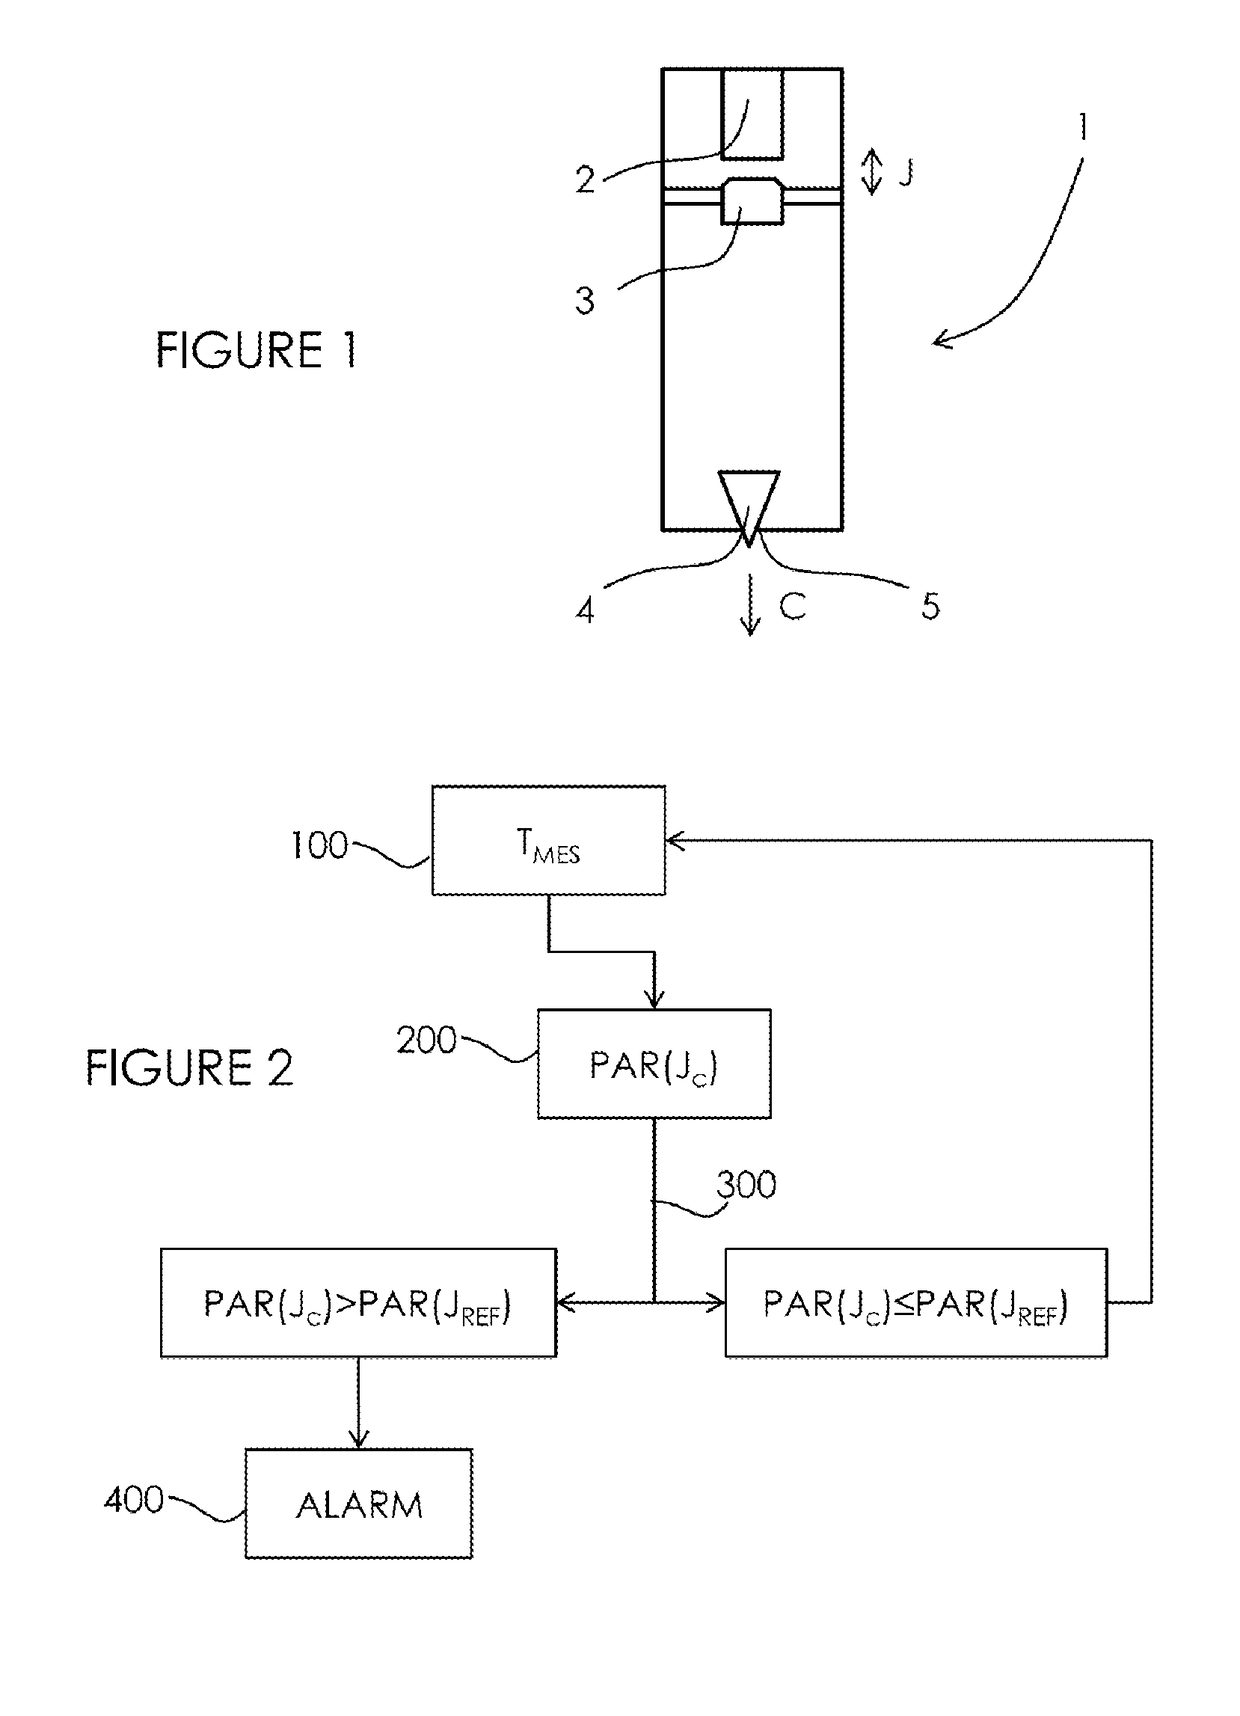 Monitoring method for monitoring a fuel injector of an internal combustion engine of a vehicle